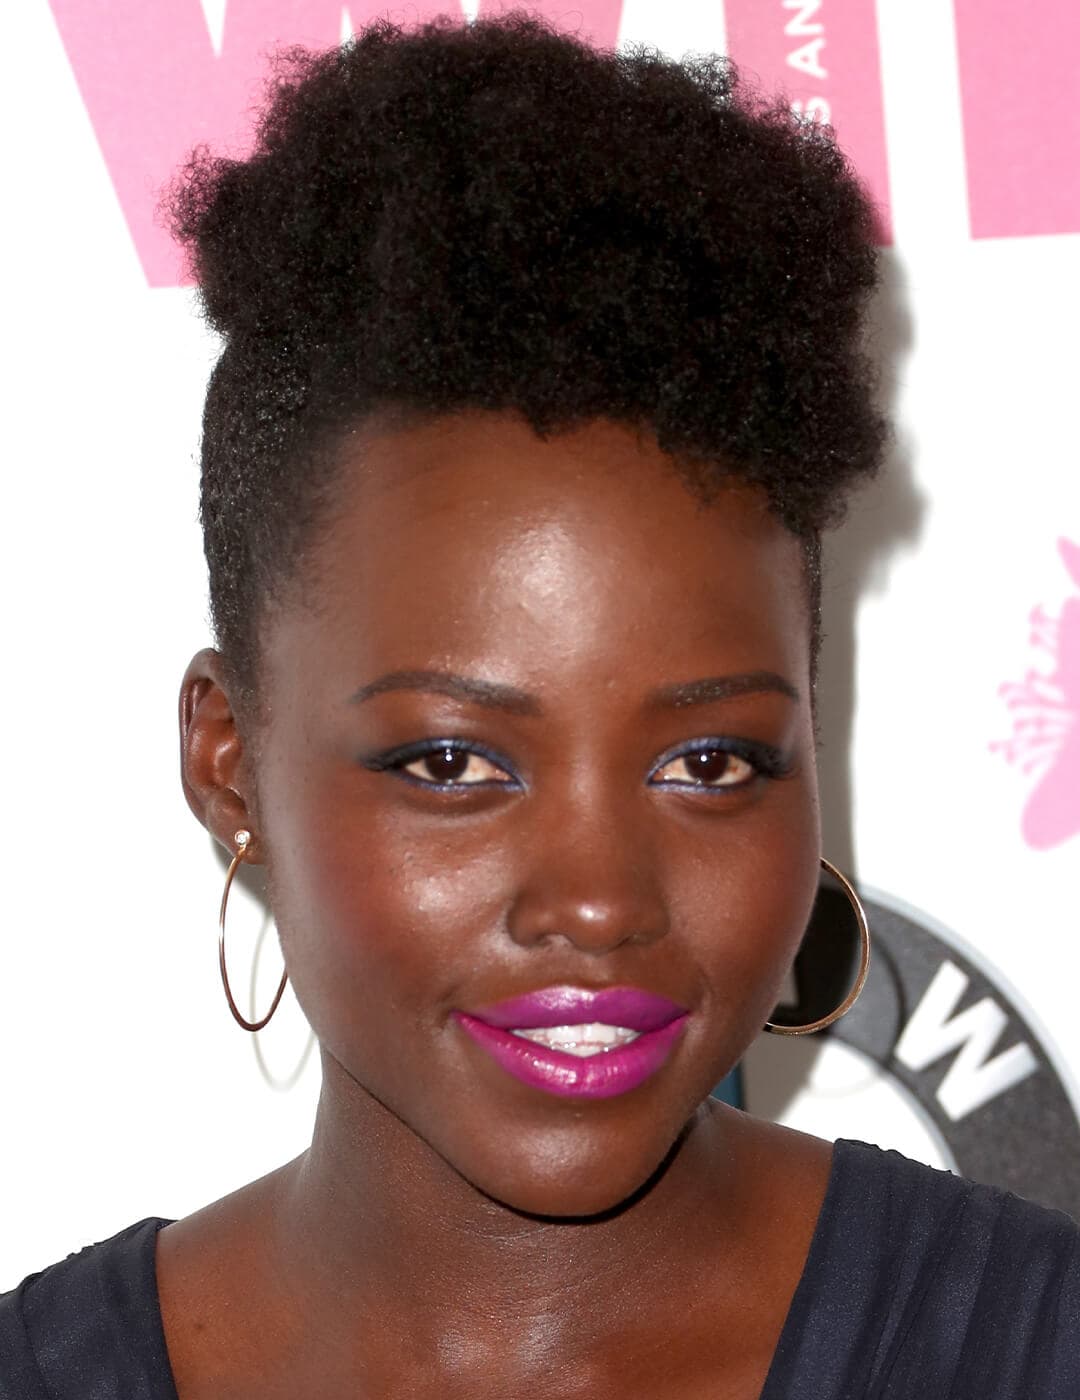 Lupita Nyong'o rocking minimal makeup paired with bold pink lips and her natural curls with undercut hairstyle